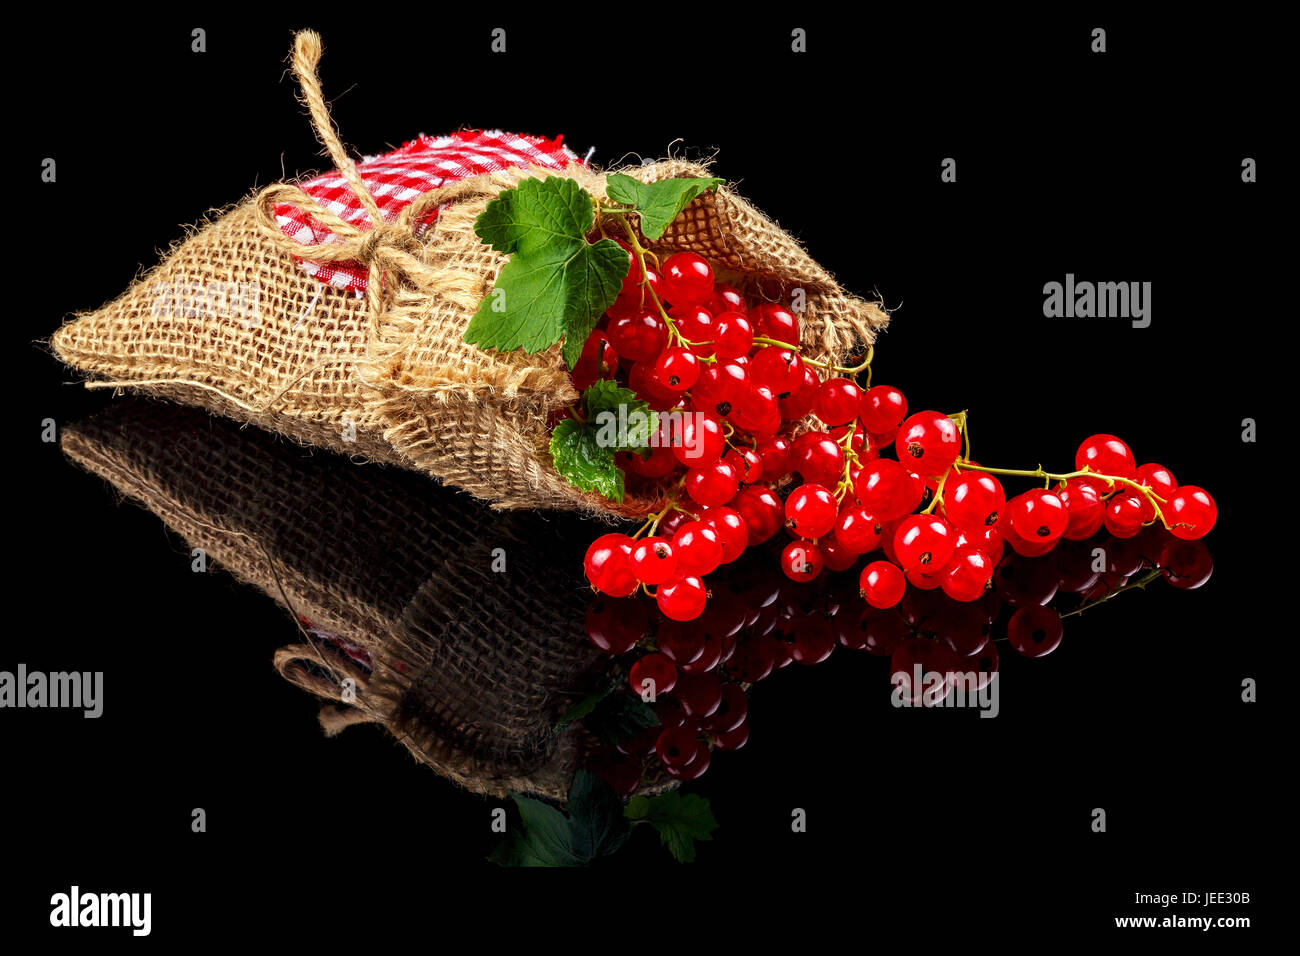 Fruits of red currants on a dark background. Close-up Stock Photo